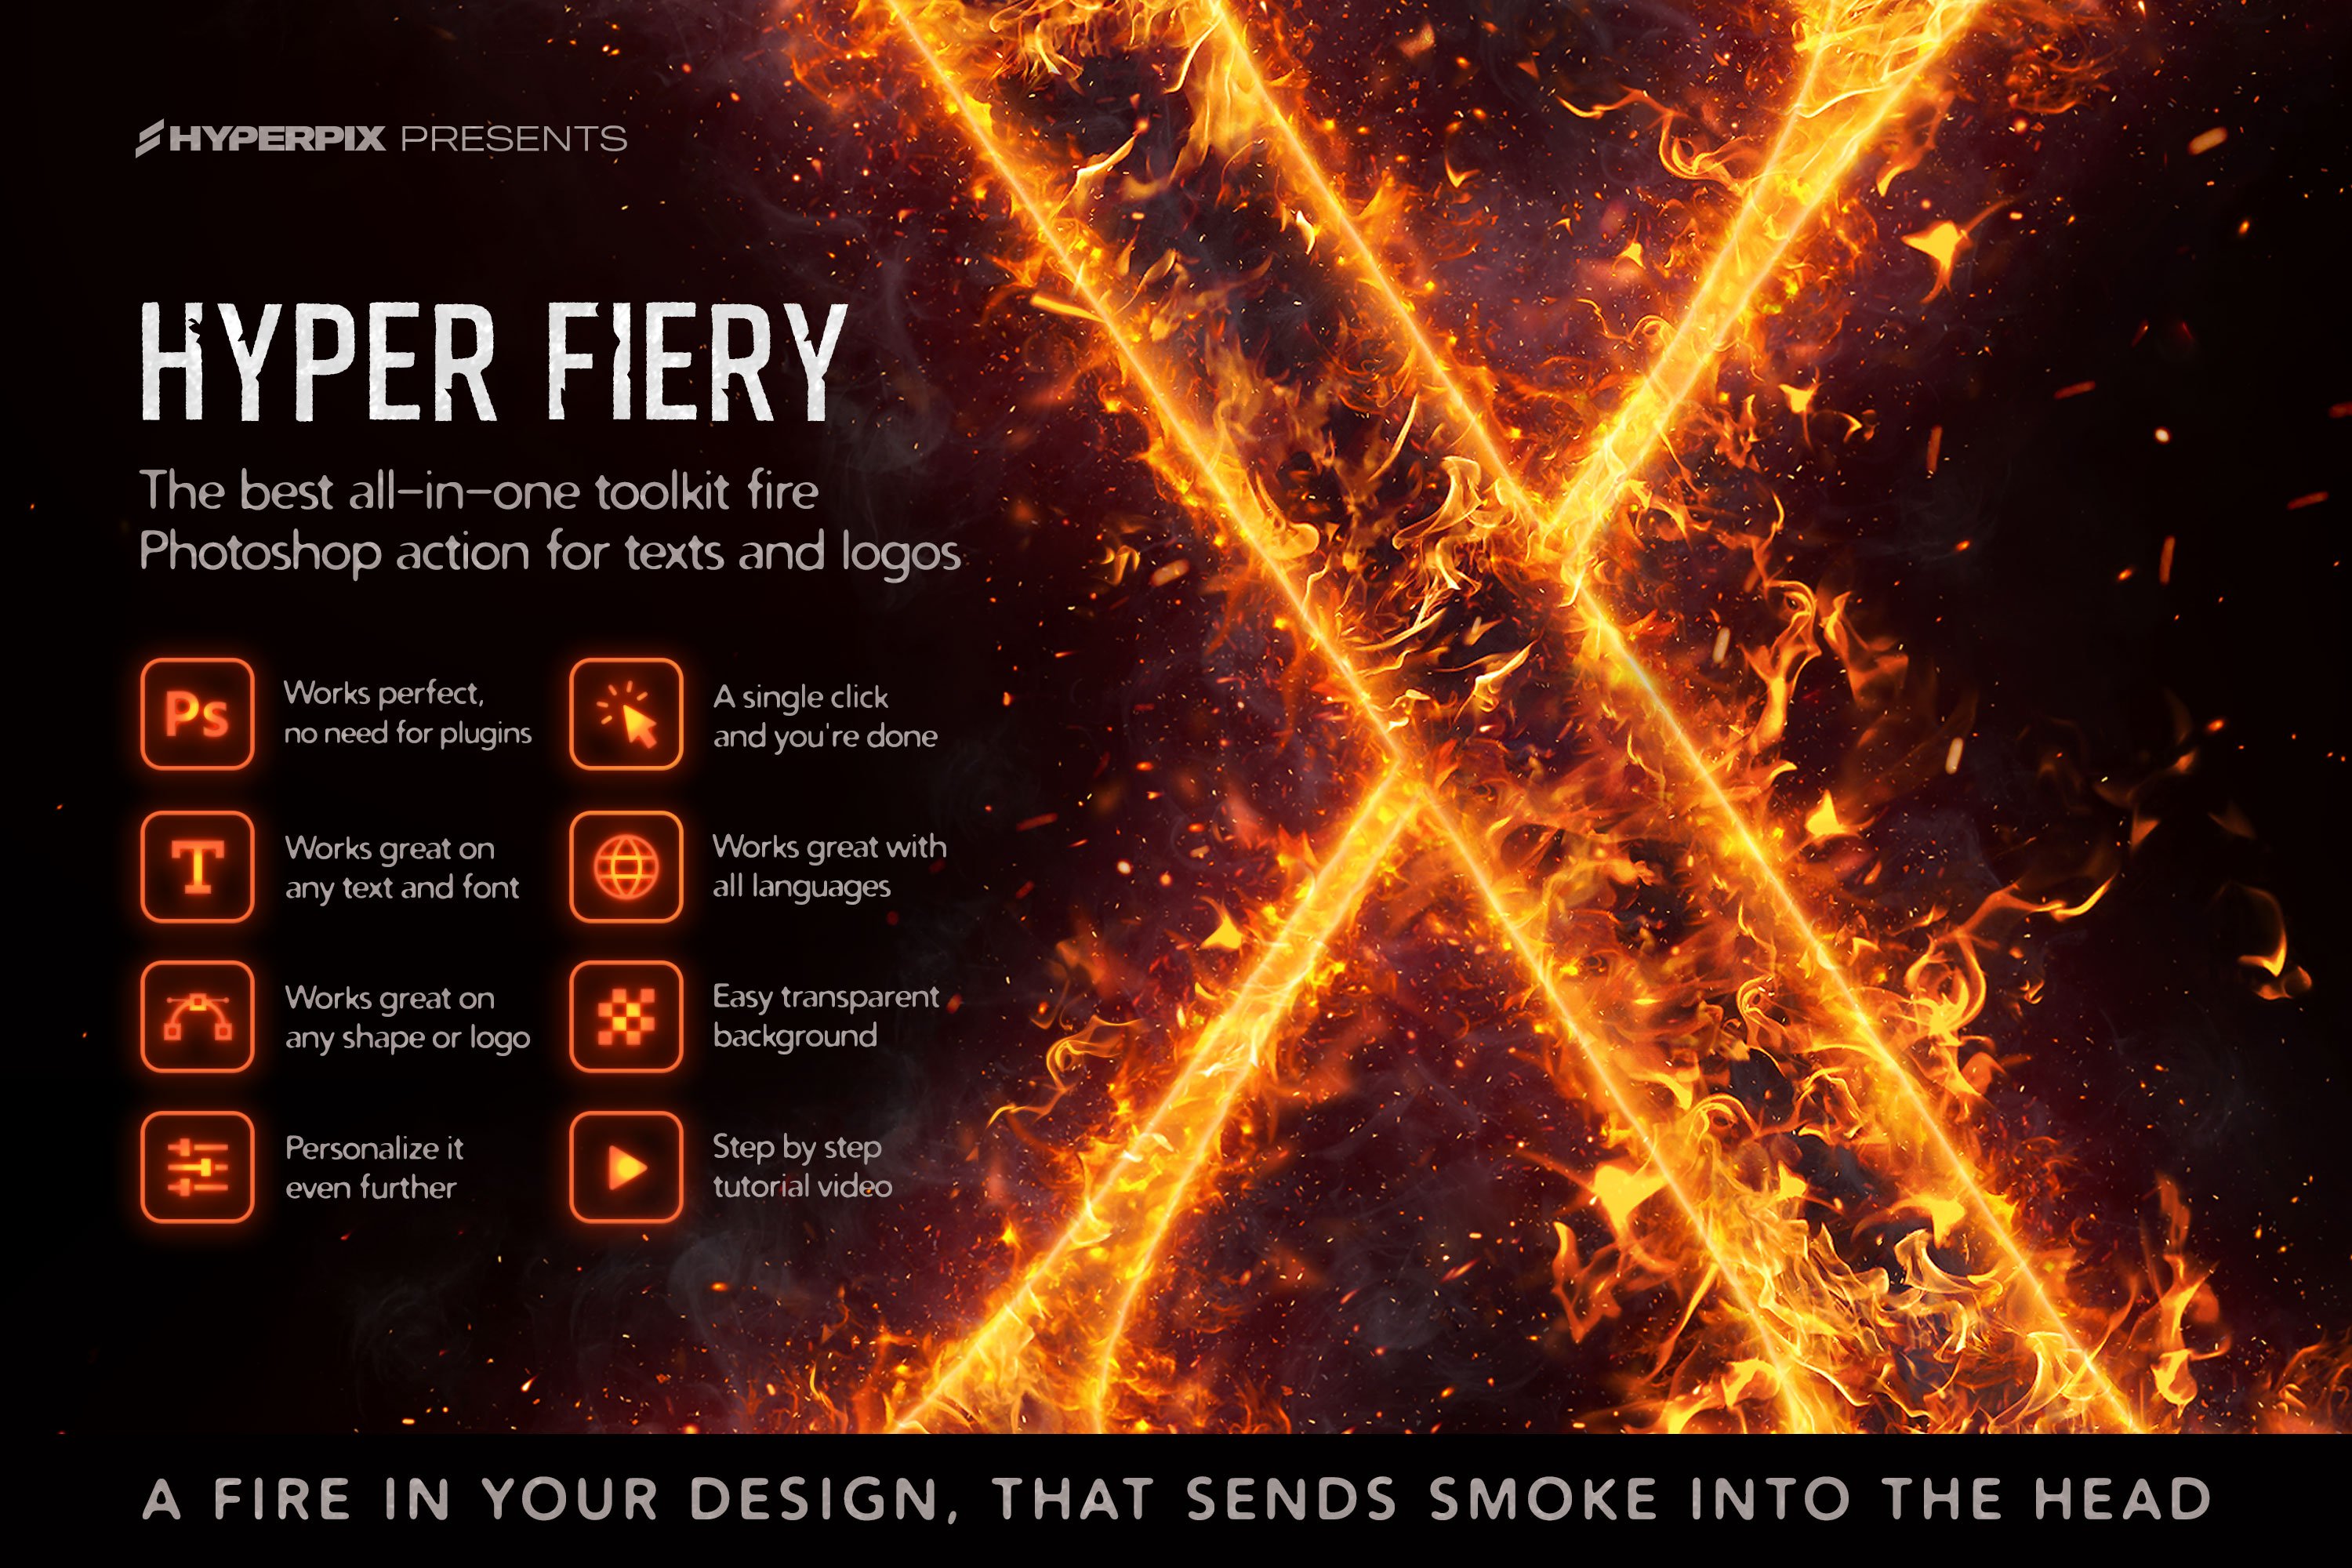 Hyper Fiery – Fire Photoshop Actioncover image.